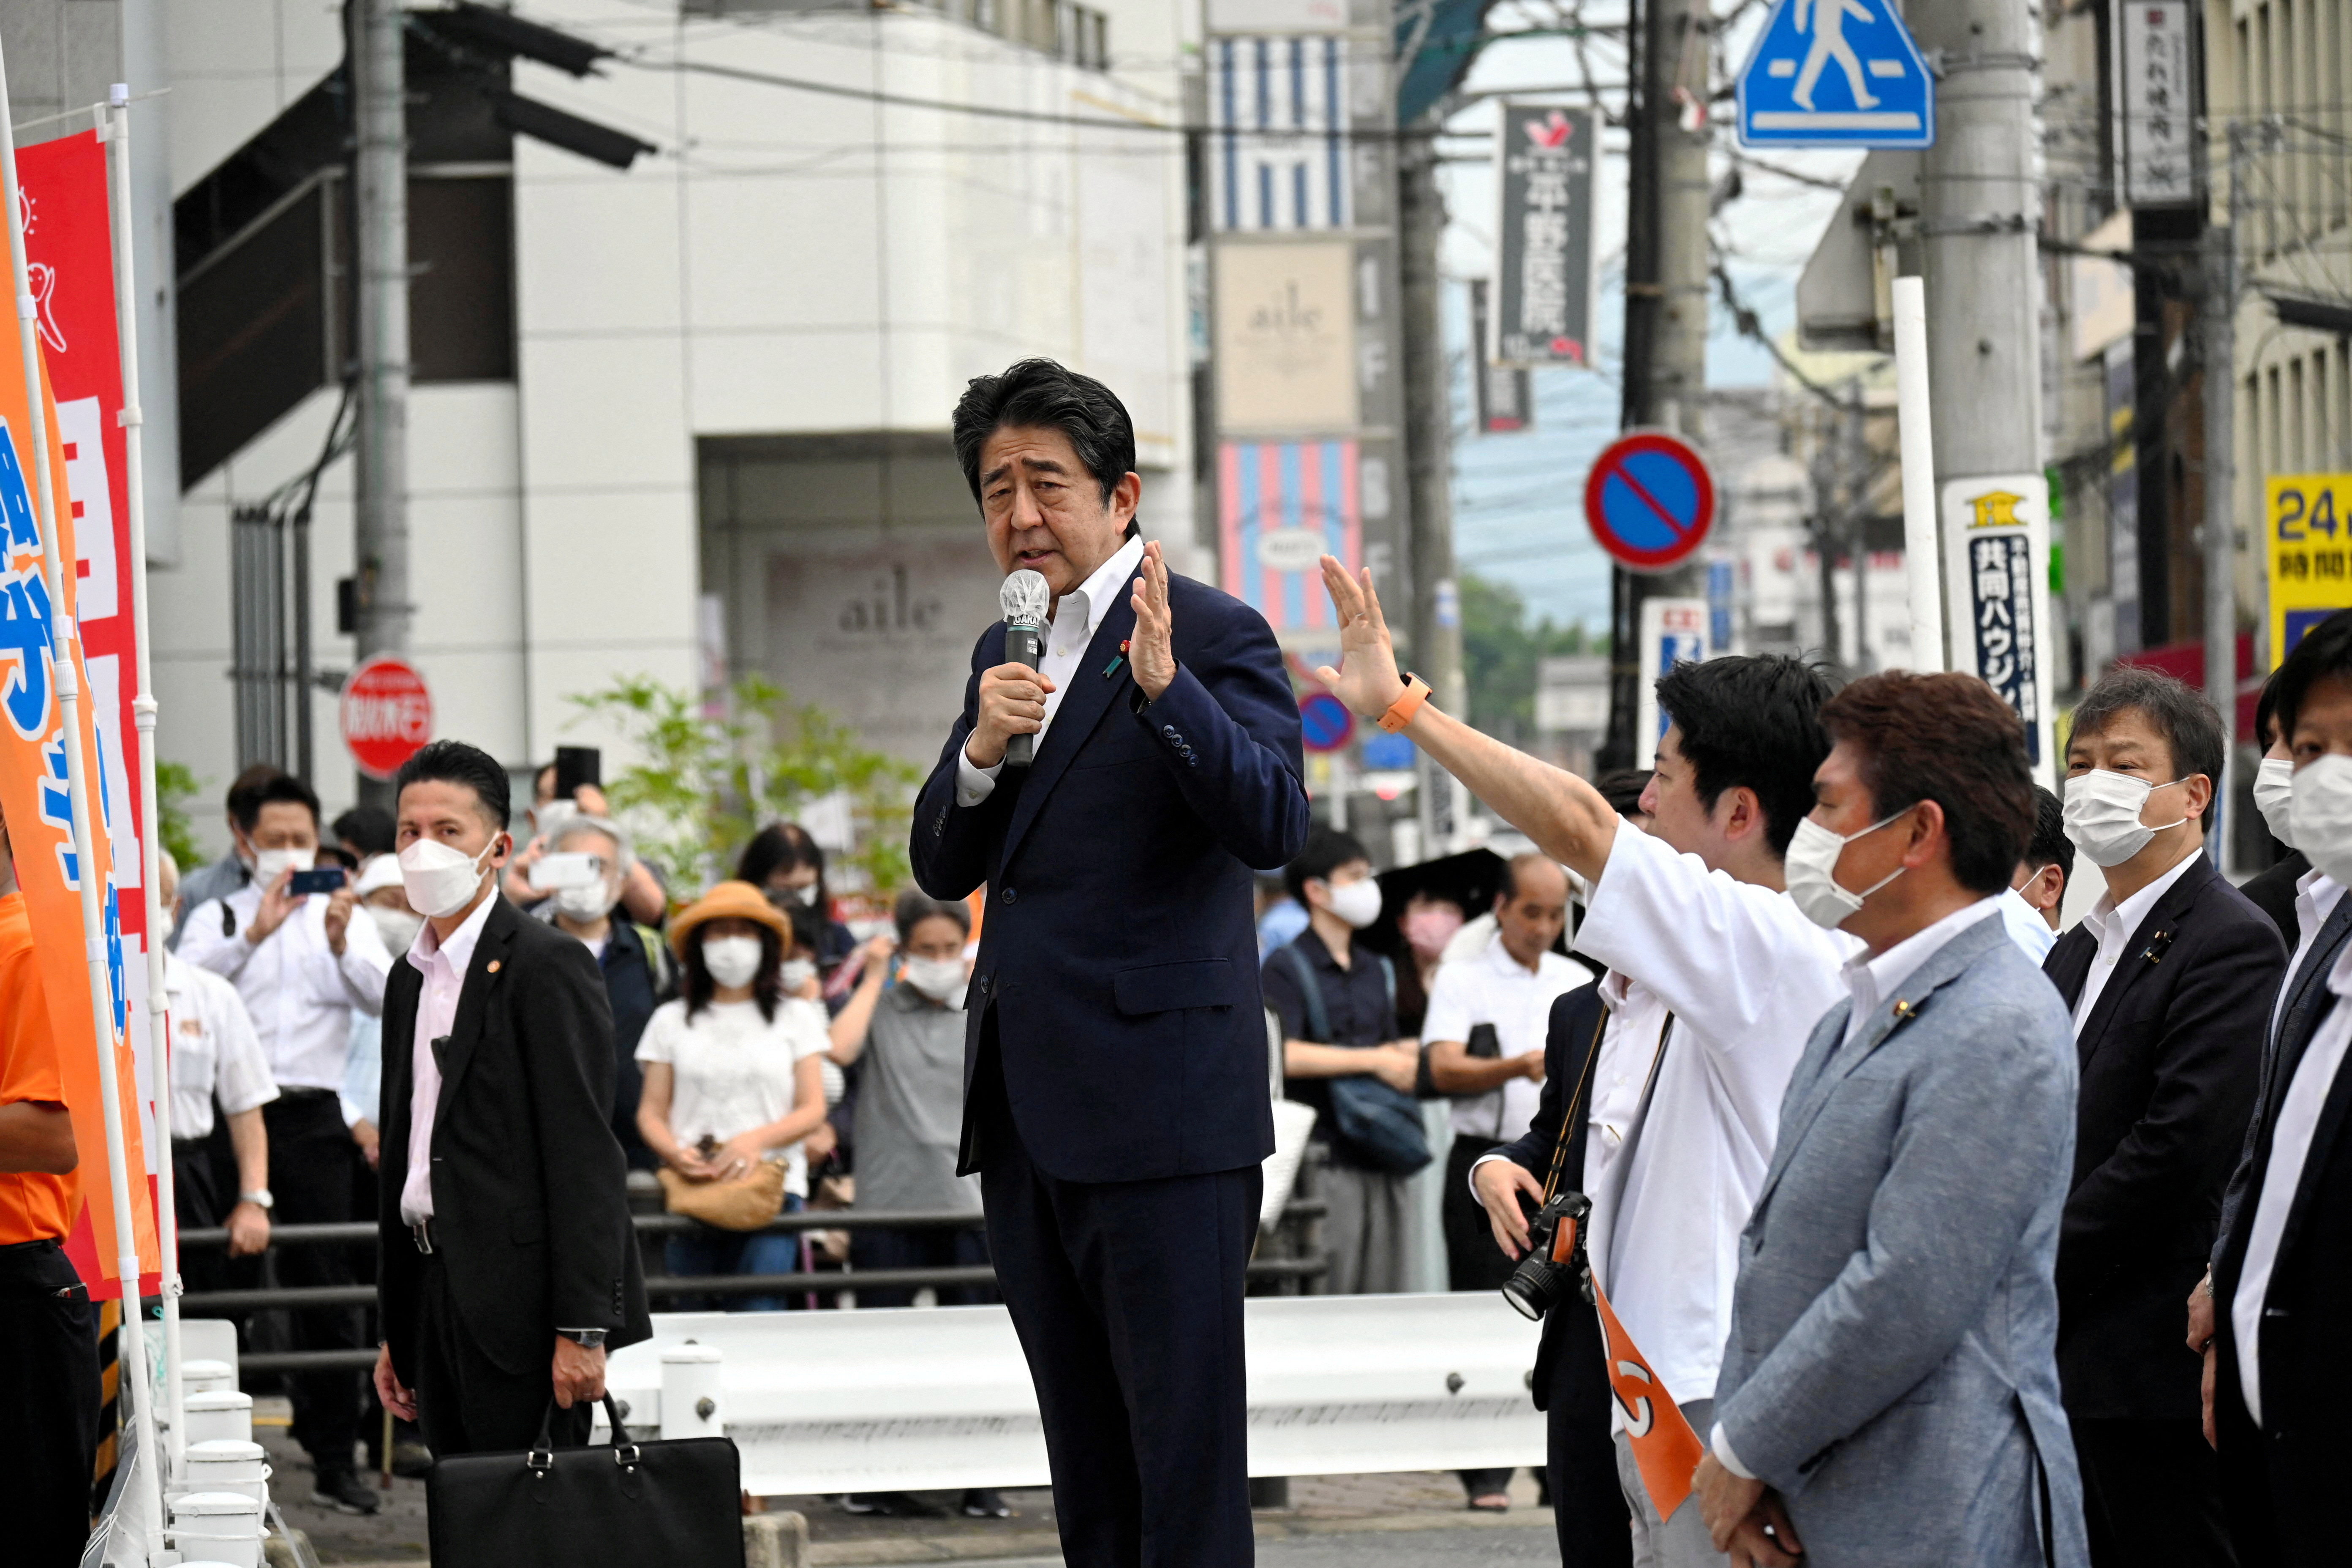 Former Japanese Prime Minister Shinzo Abe makes a speech before he was shot from behind by a man in Nara